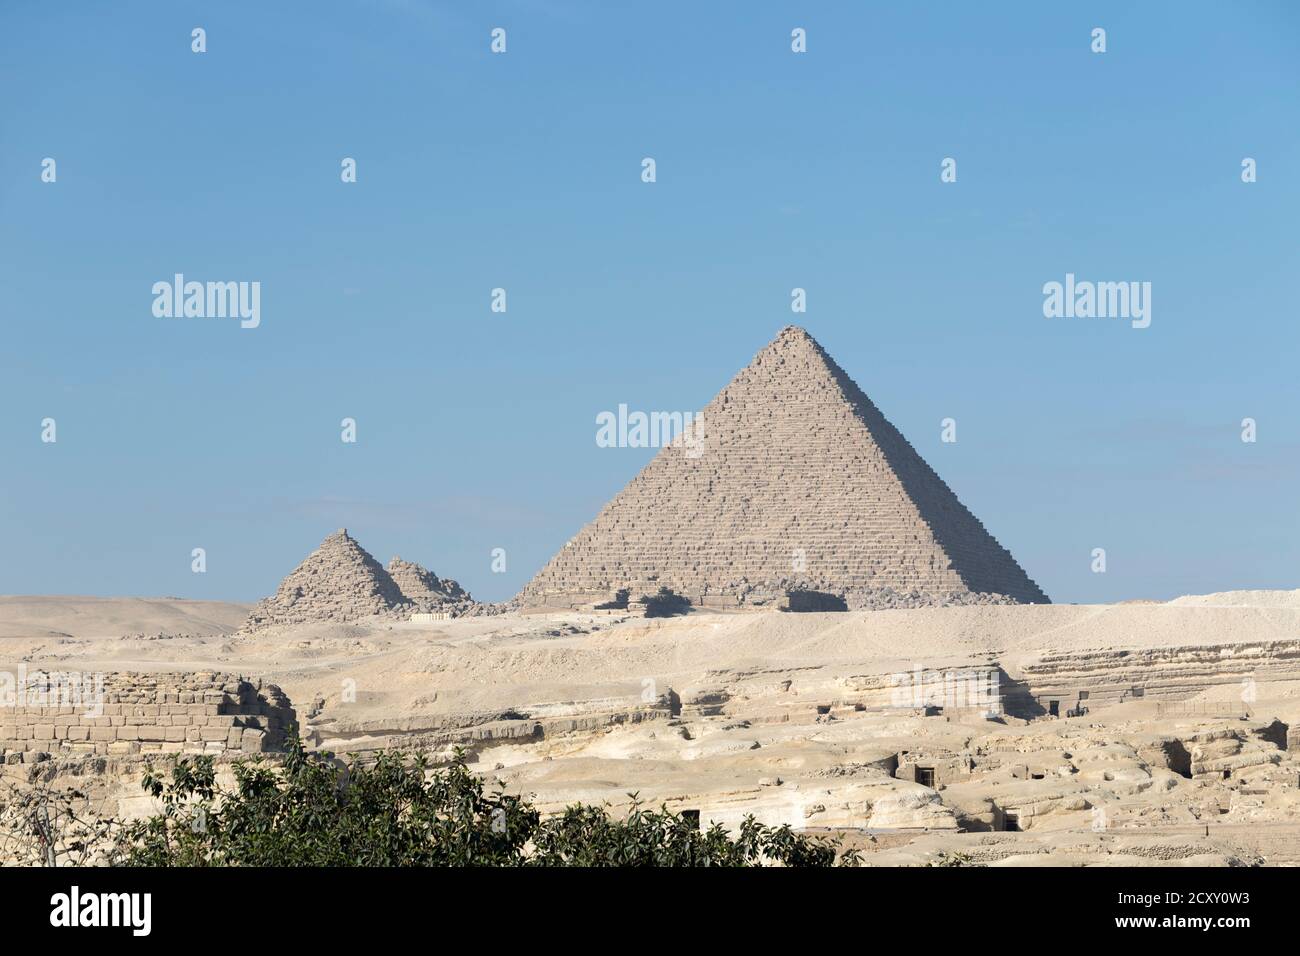 The pyramid of  Menkaure next to the queen's pyramids, Giza, Egypt Stock Photo